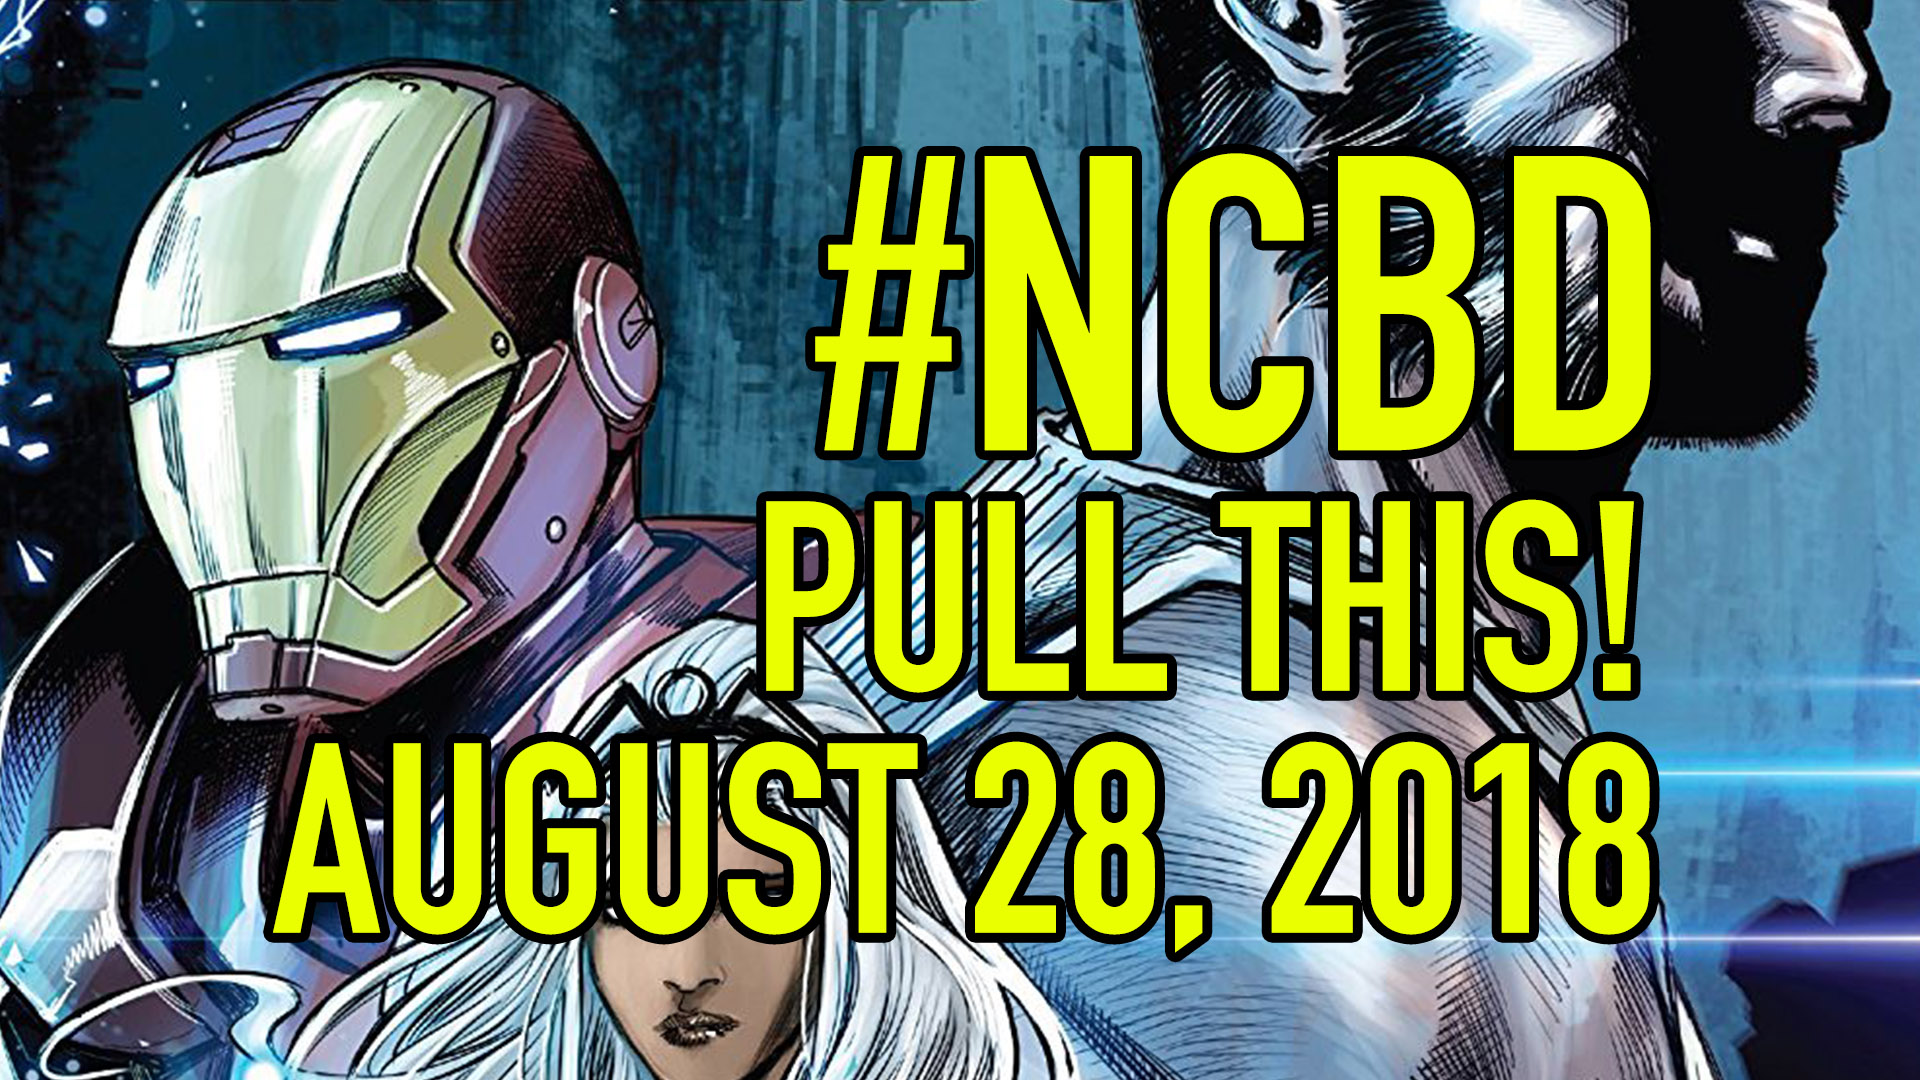 #NCBD Pull This! August 29, 2018: The 5 comic books you should buy this week